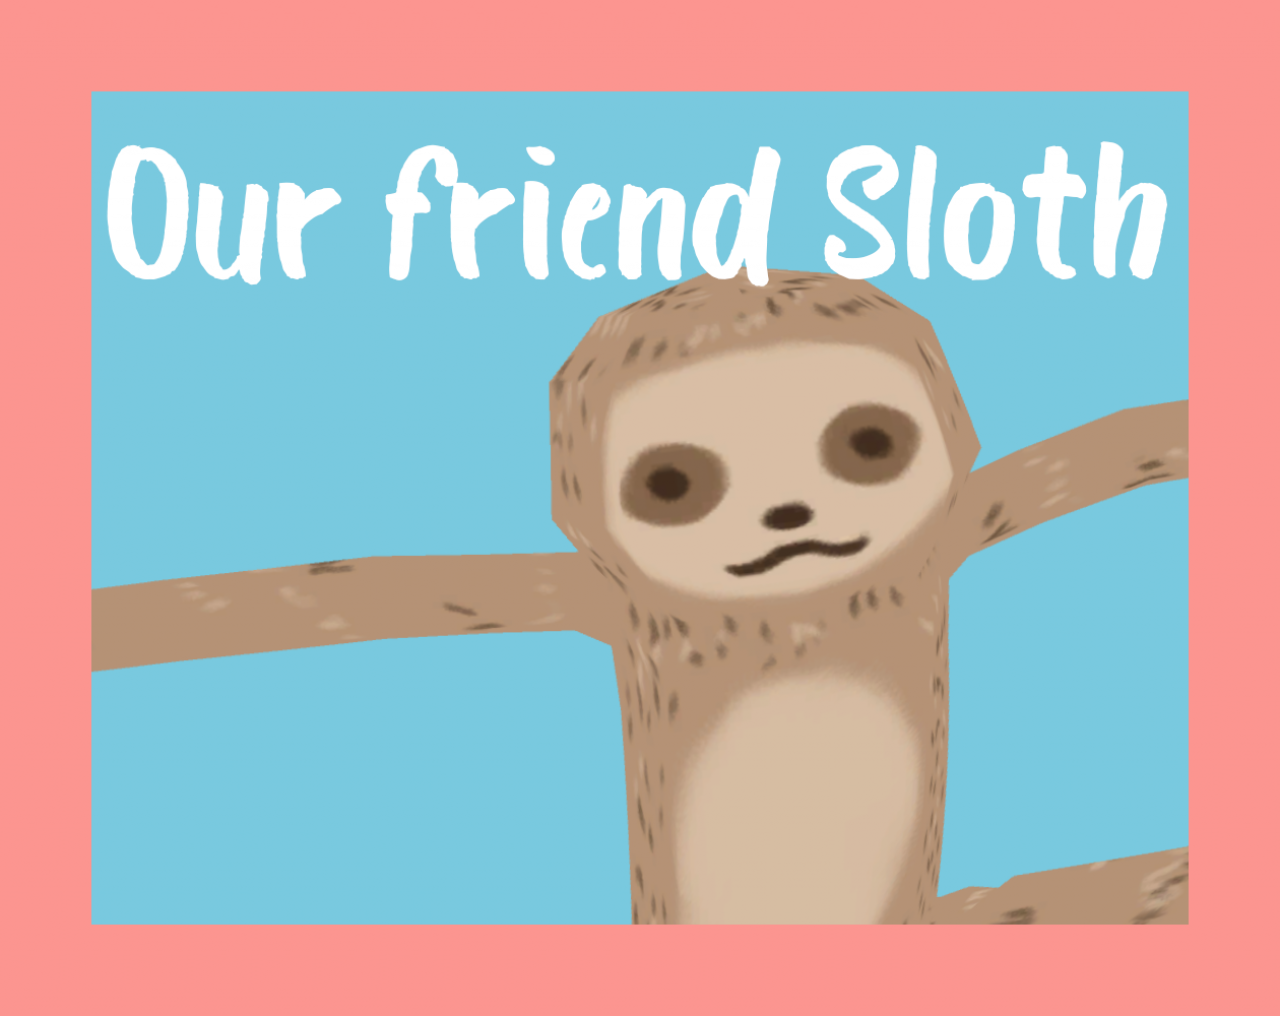 Our friend Sloth